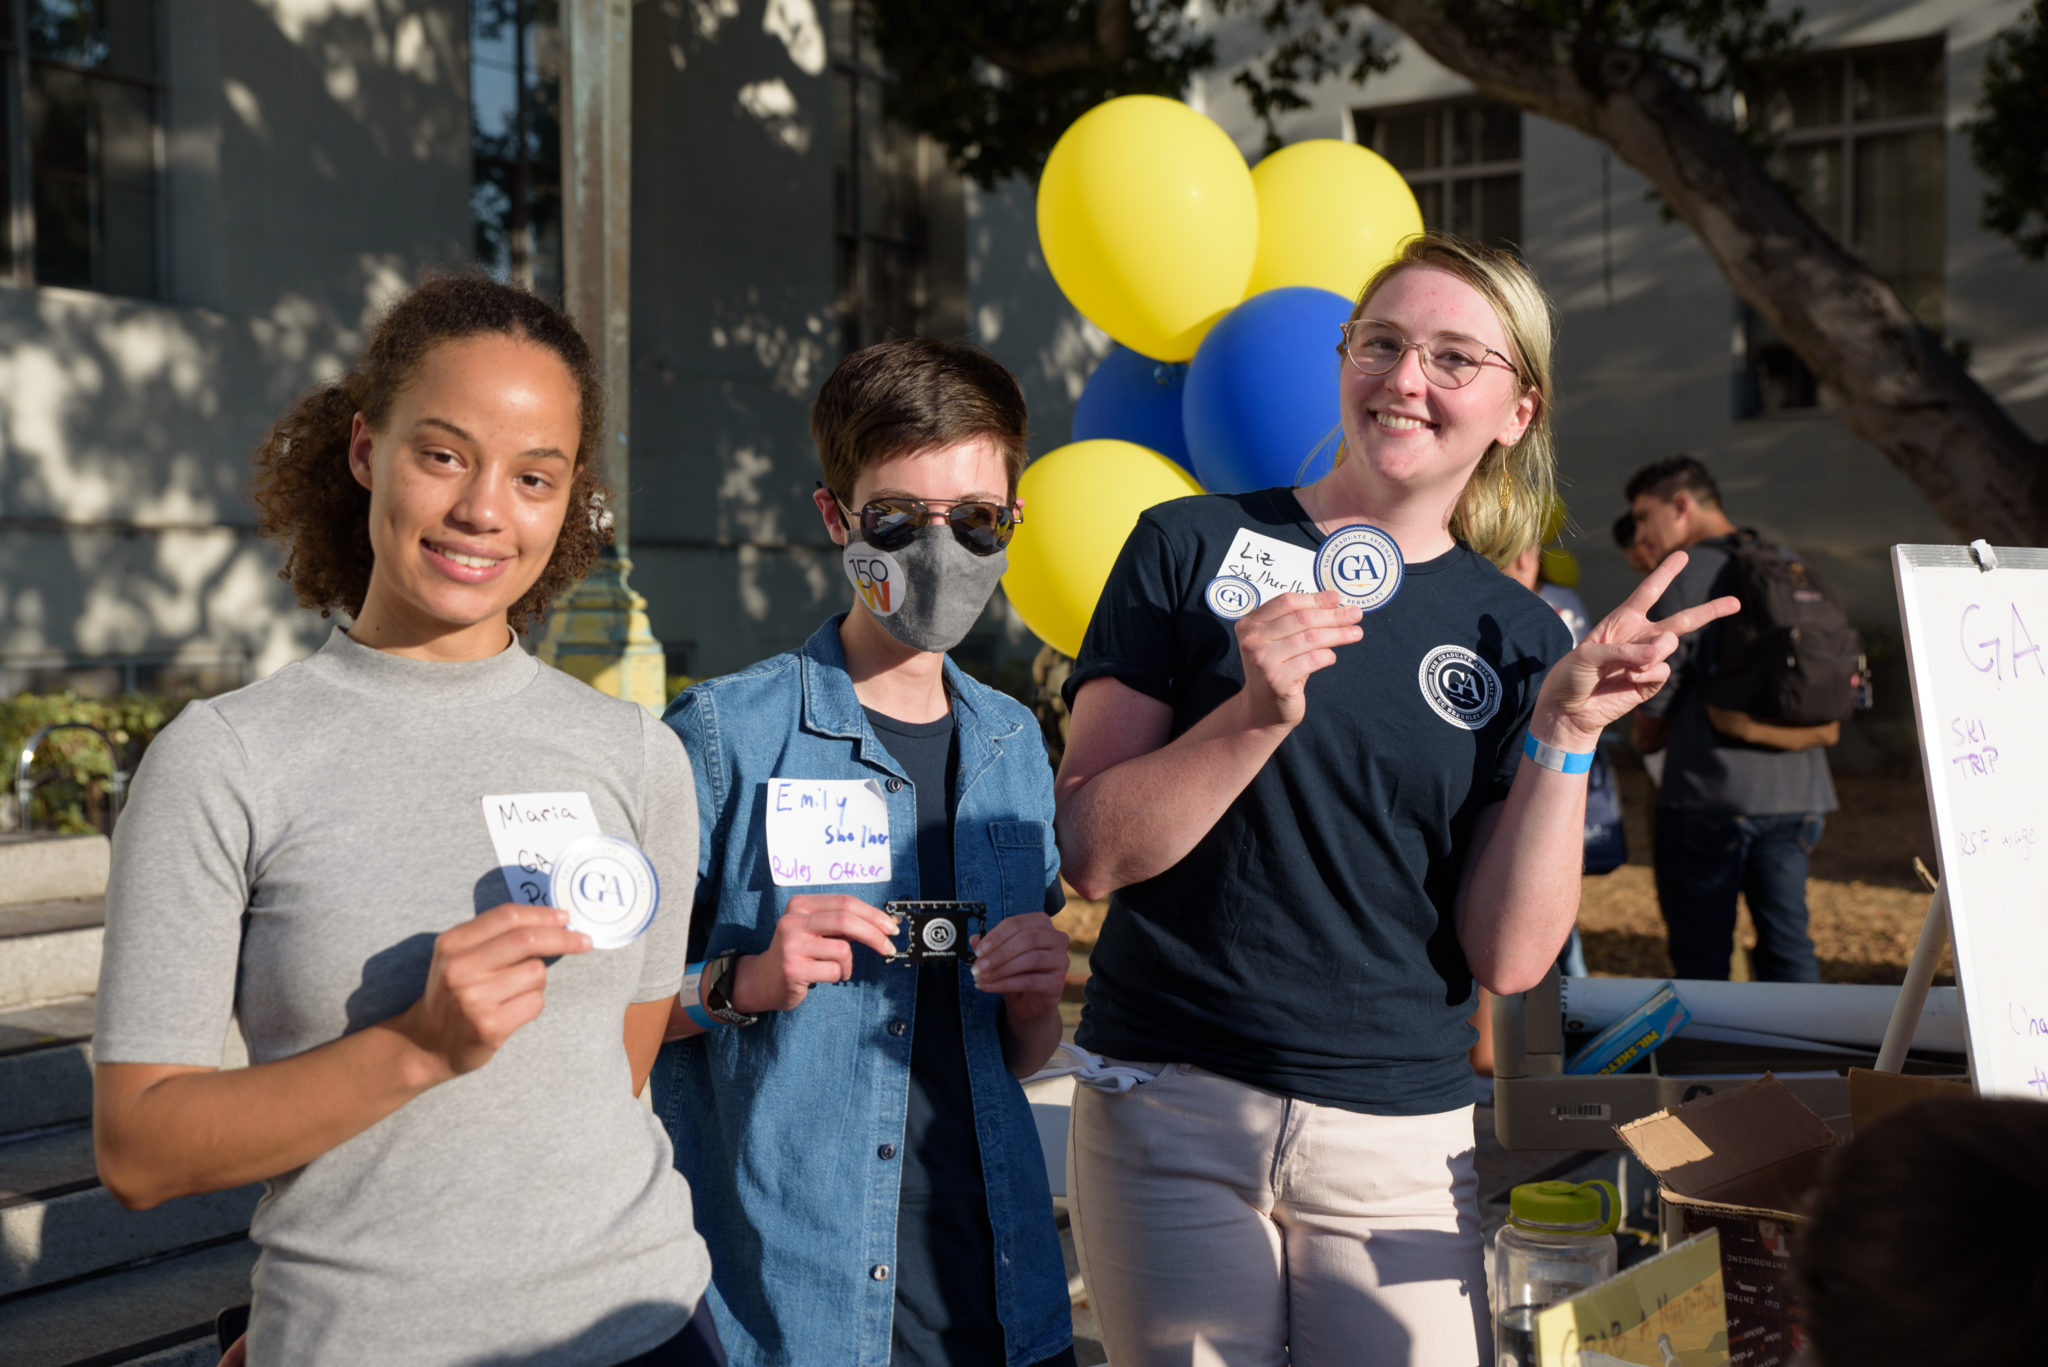 three students standing in front of yellow and blue balloons